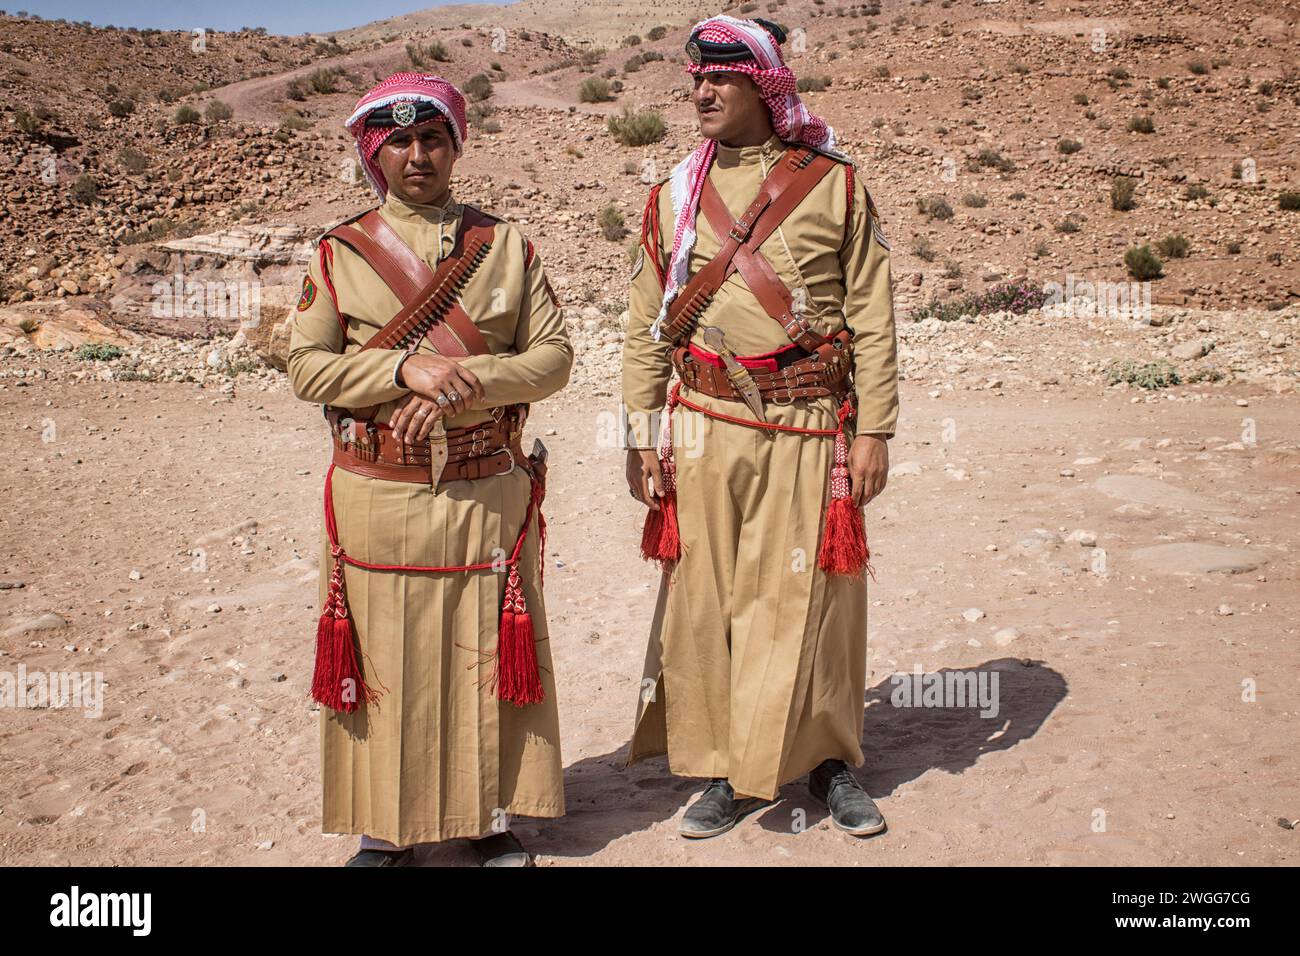 Two Jordanian Police officers that patrol the UNESCO site. Petra, is a historic and archaeological city in southern Jordan. Famous for its rock-cut architecture and water conduit system, Petra is also called the 'Rose City' because of the colour of the sandstone from which it is carved. It is adjacent to the mountain of Jabal Al-Madbah, in a basin surrounded by mountains forming the eastern flank of the Arabah valley running from the Dead Sea to the Gulf of Aqaba. Access to the city is through a famously picturesque gorge called the Siq, which leads directly to the Khazneh. Jordon. Stock Photo